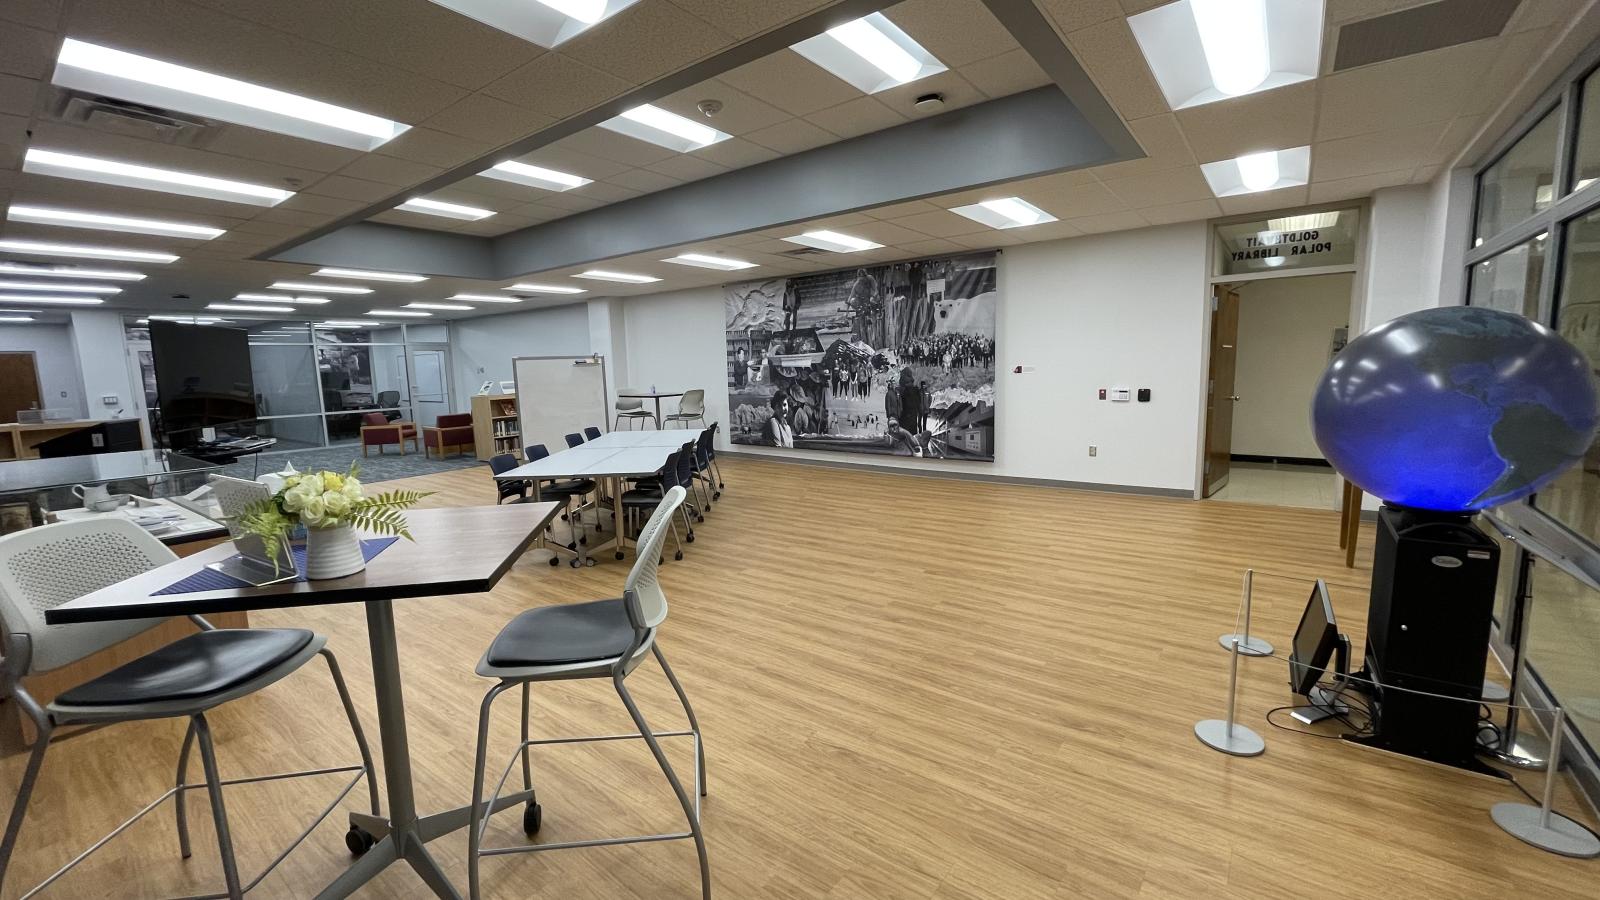 inside the Goldthwait Polar Library with white table and rolling chairs in the center with white walls and a vinyl wall length drape image on right with a large lit glob on a black stand next to glass wall and a large monitor next to a glass display case on light wooden base to the left with light wood floors and light book shelve and white portable dry erase board behind table and white tile drop ceilings with with some squares containing florescent light fixtures that are on